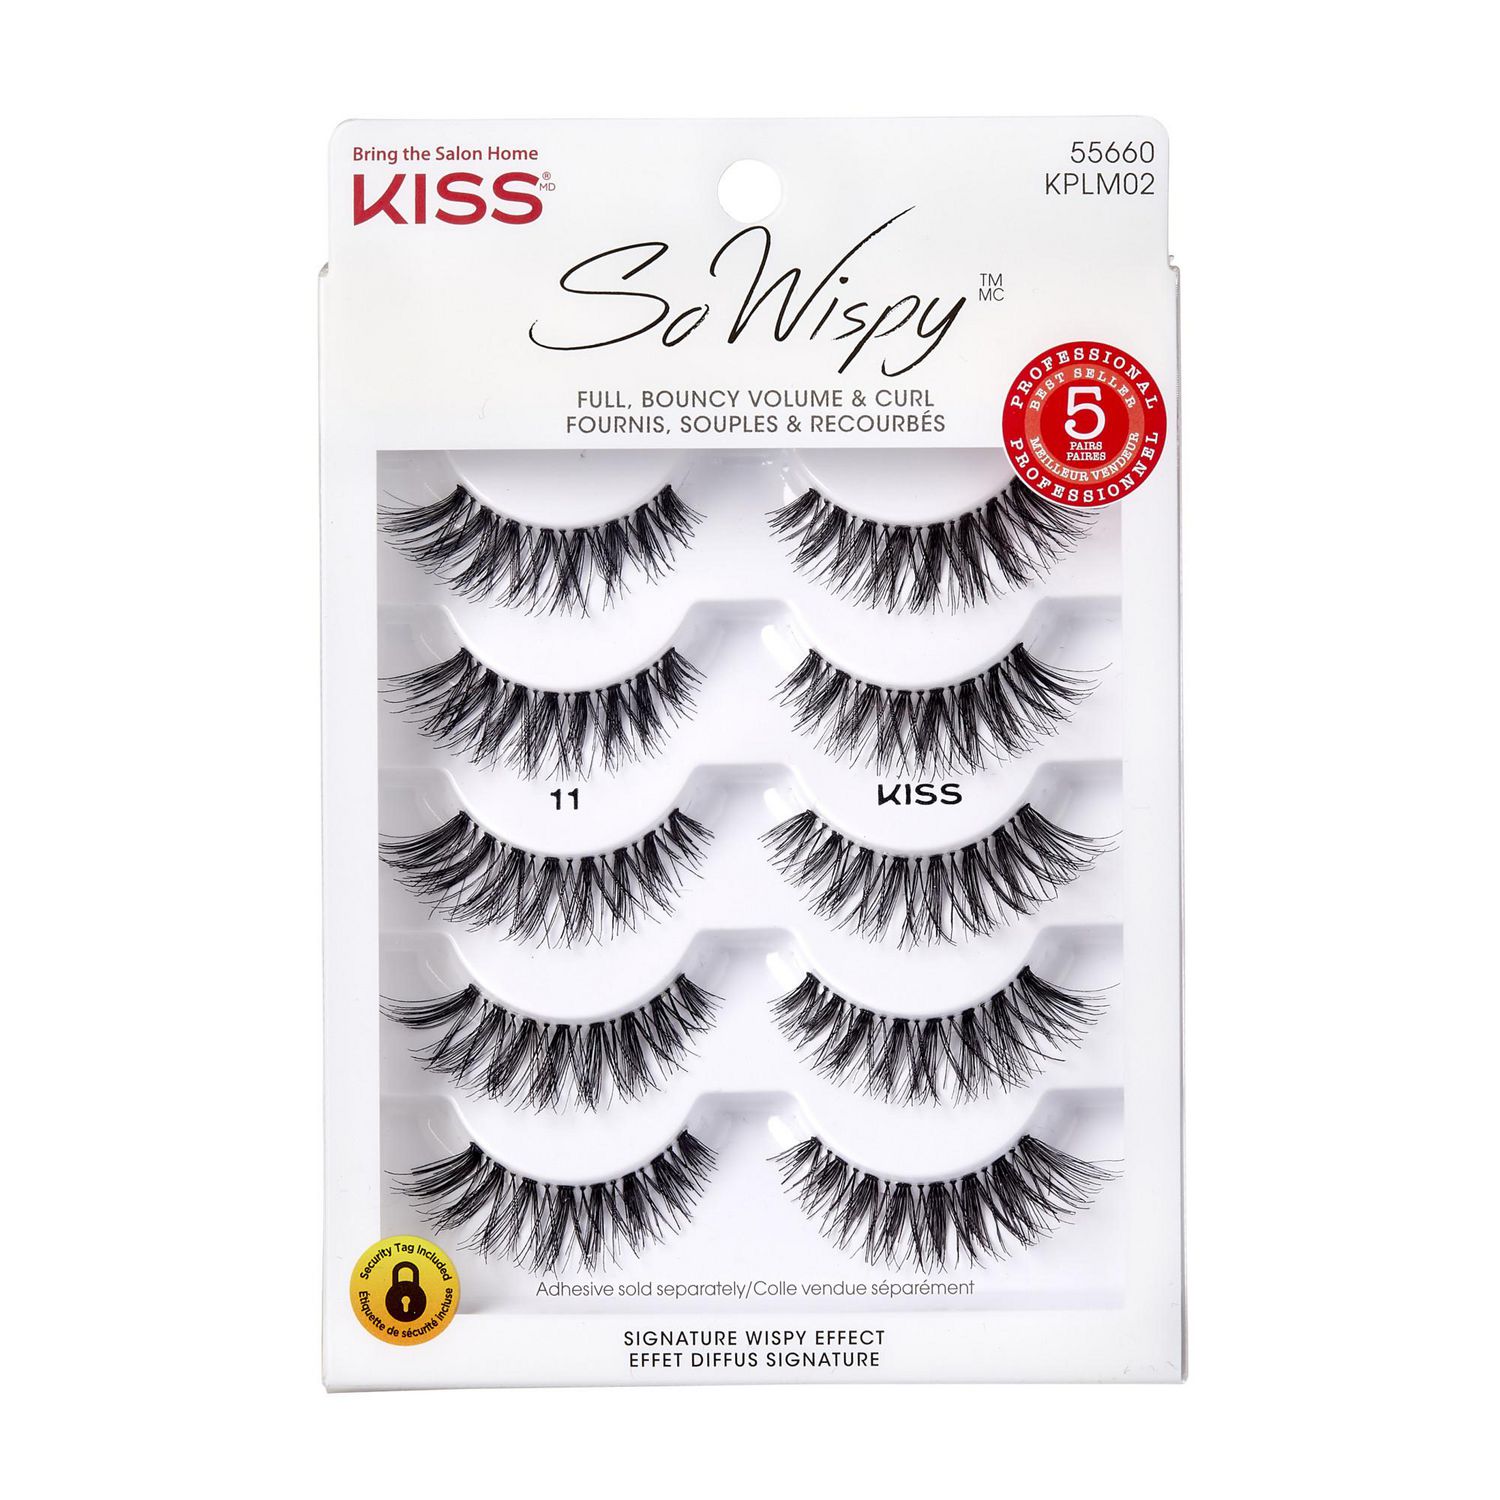 Where to Buy Kiss Eyelashes in Canada?